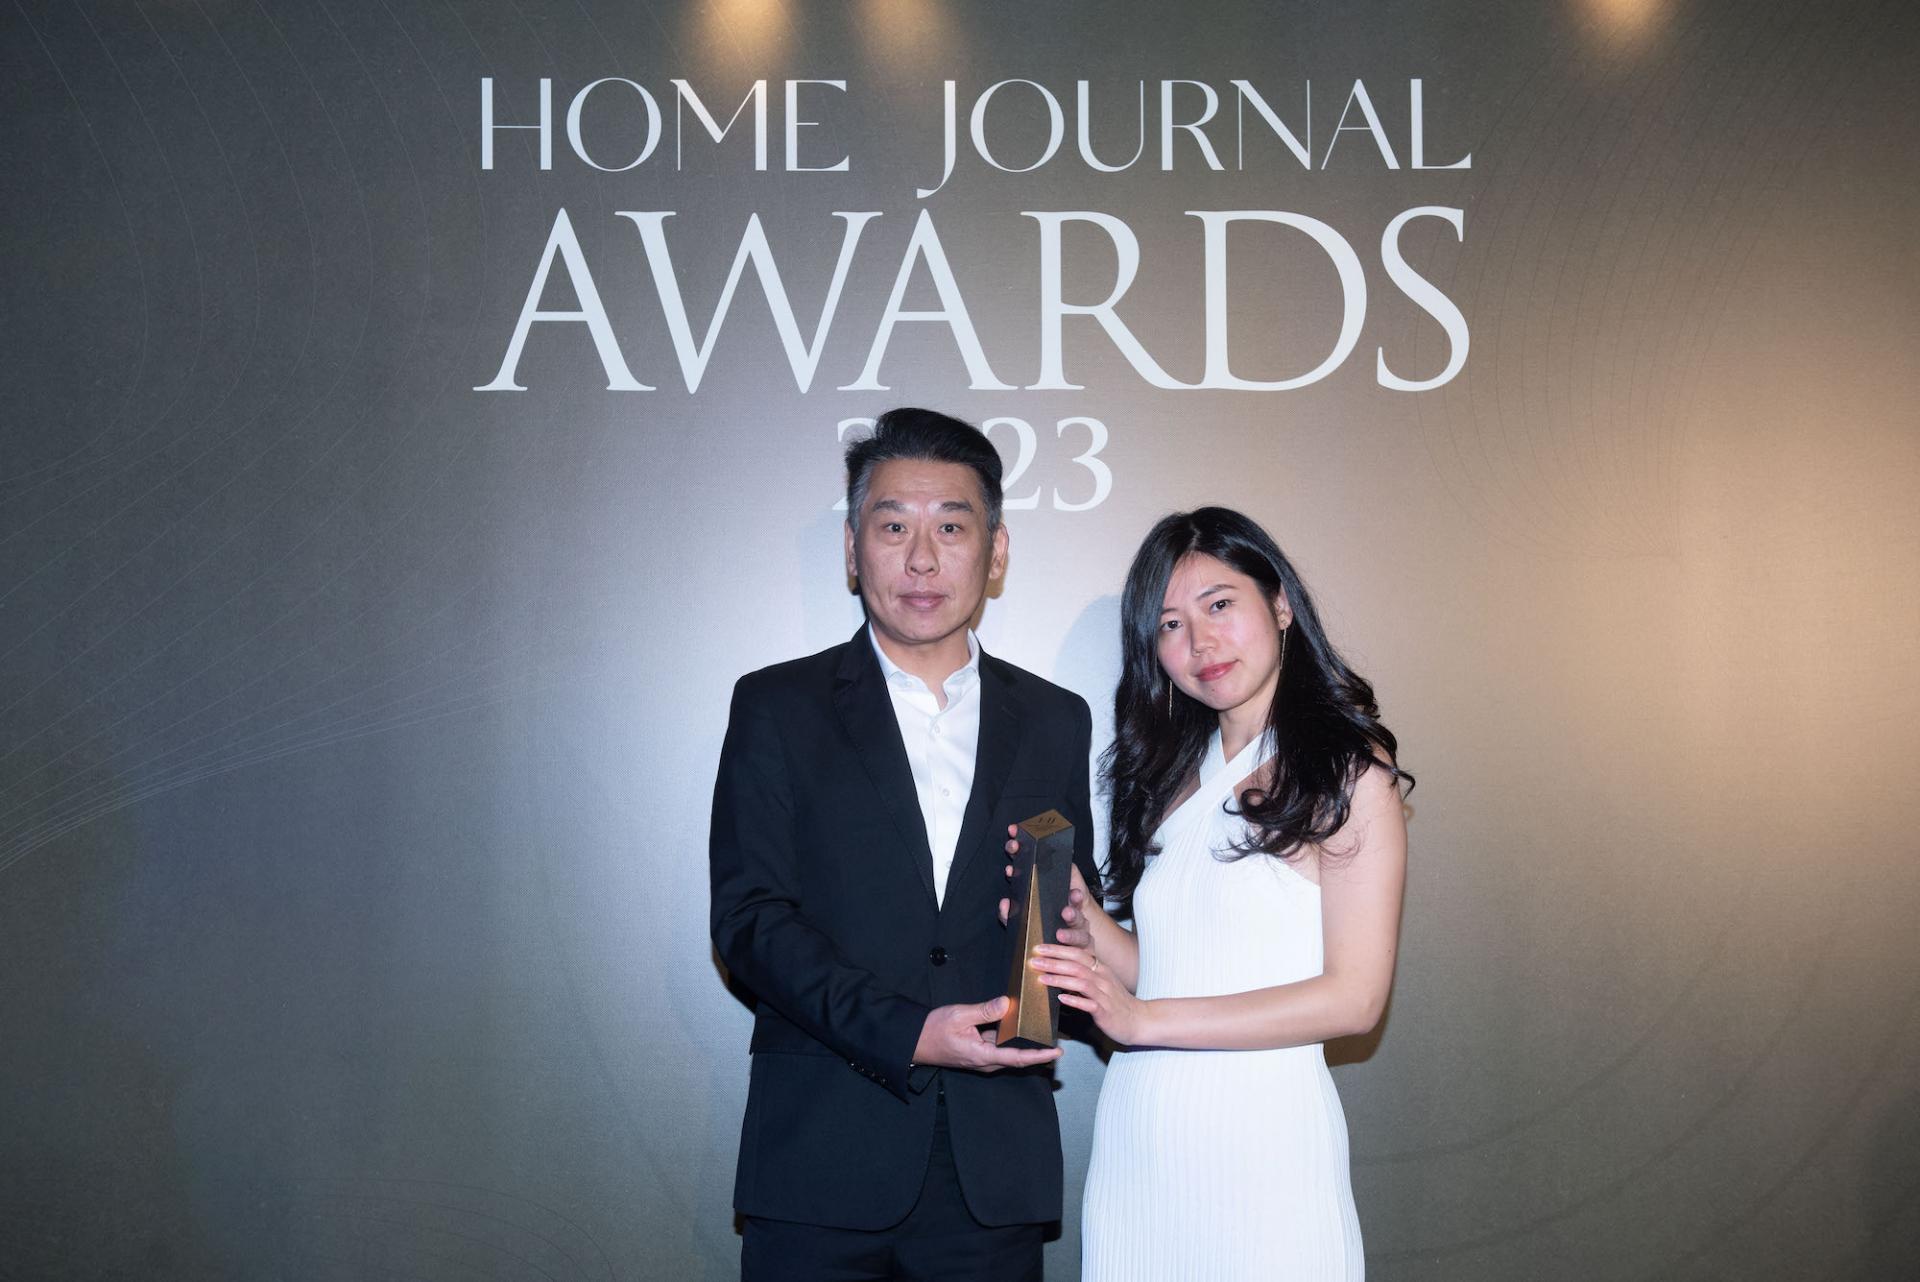 Highlights from the Home Journal Awards 2023